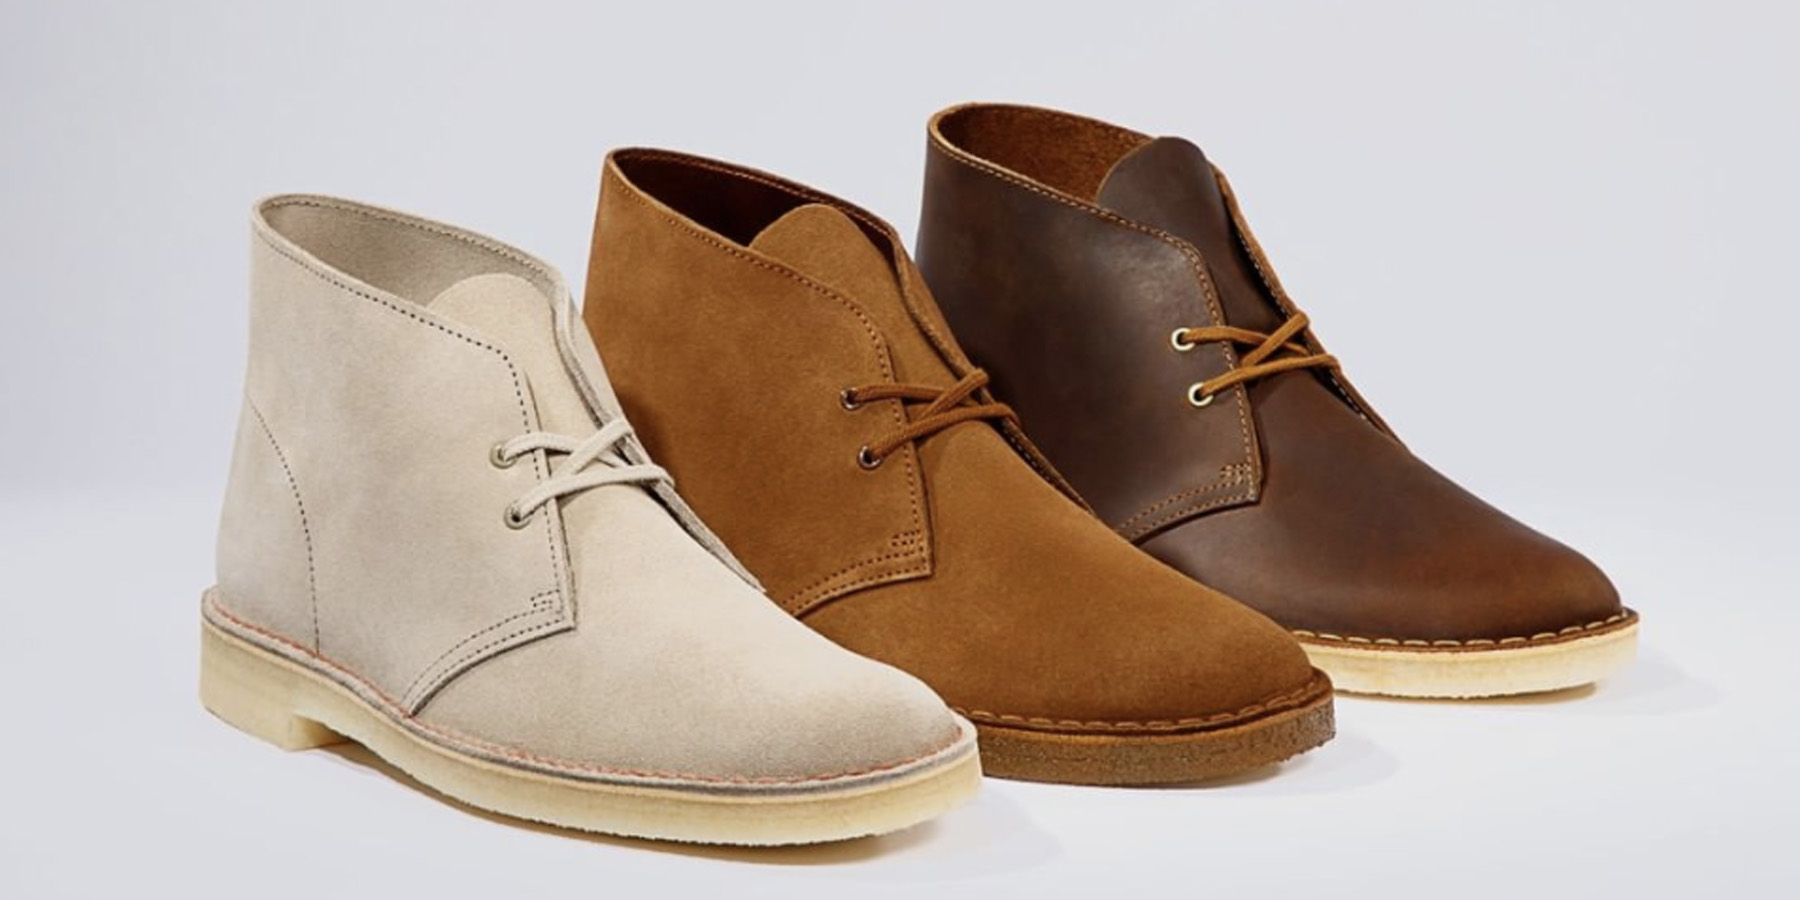 Clarks takes an extra 30% off sitewide 